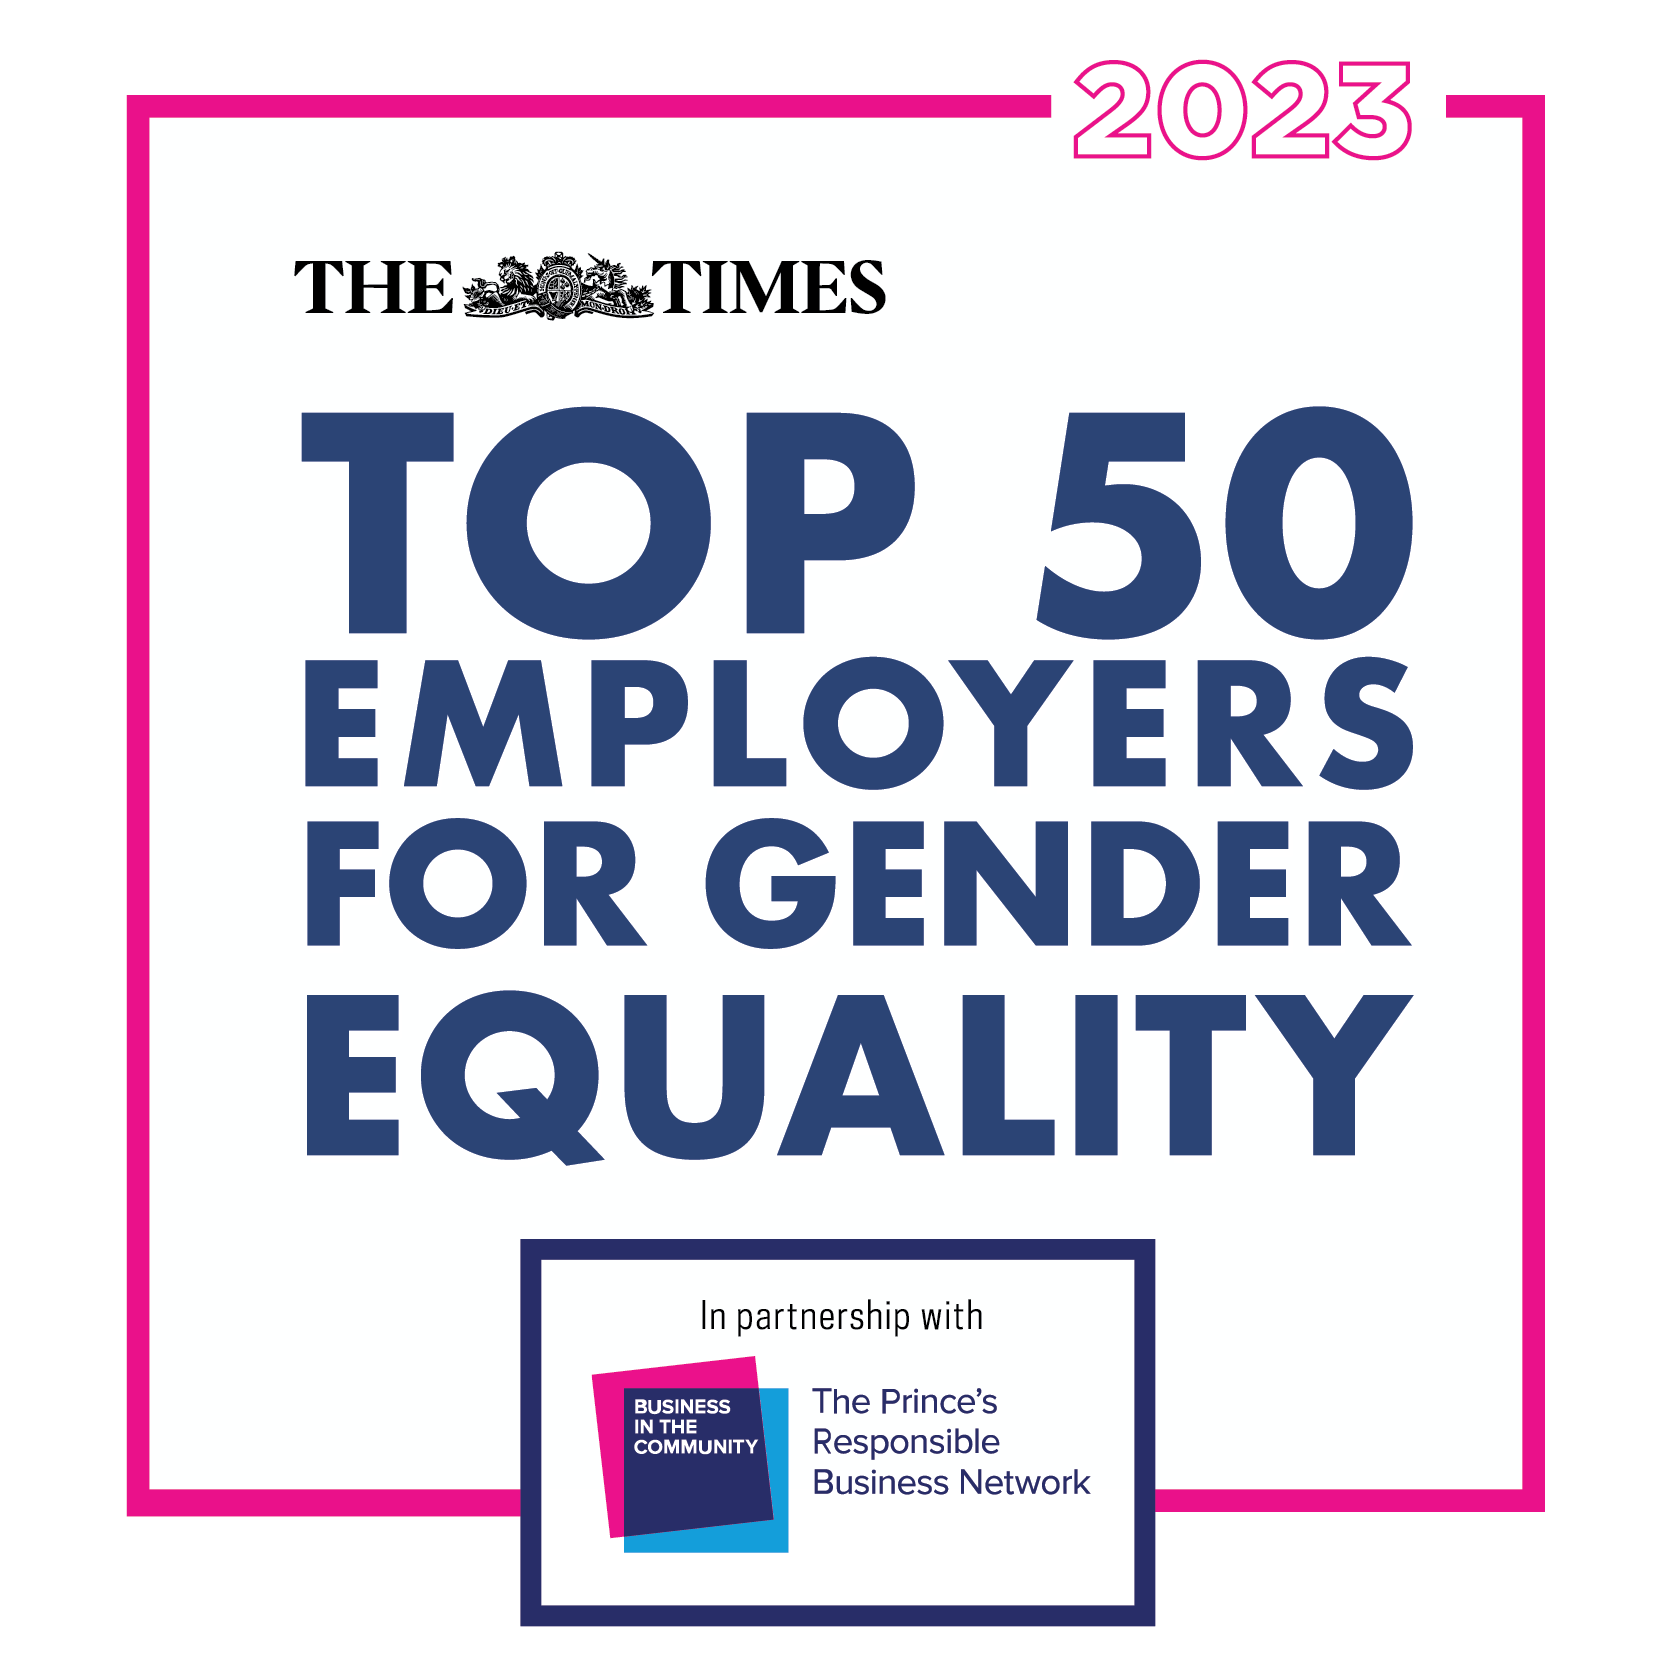 The Times Top 50 Employers for Gender Equality 2023 logo